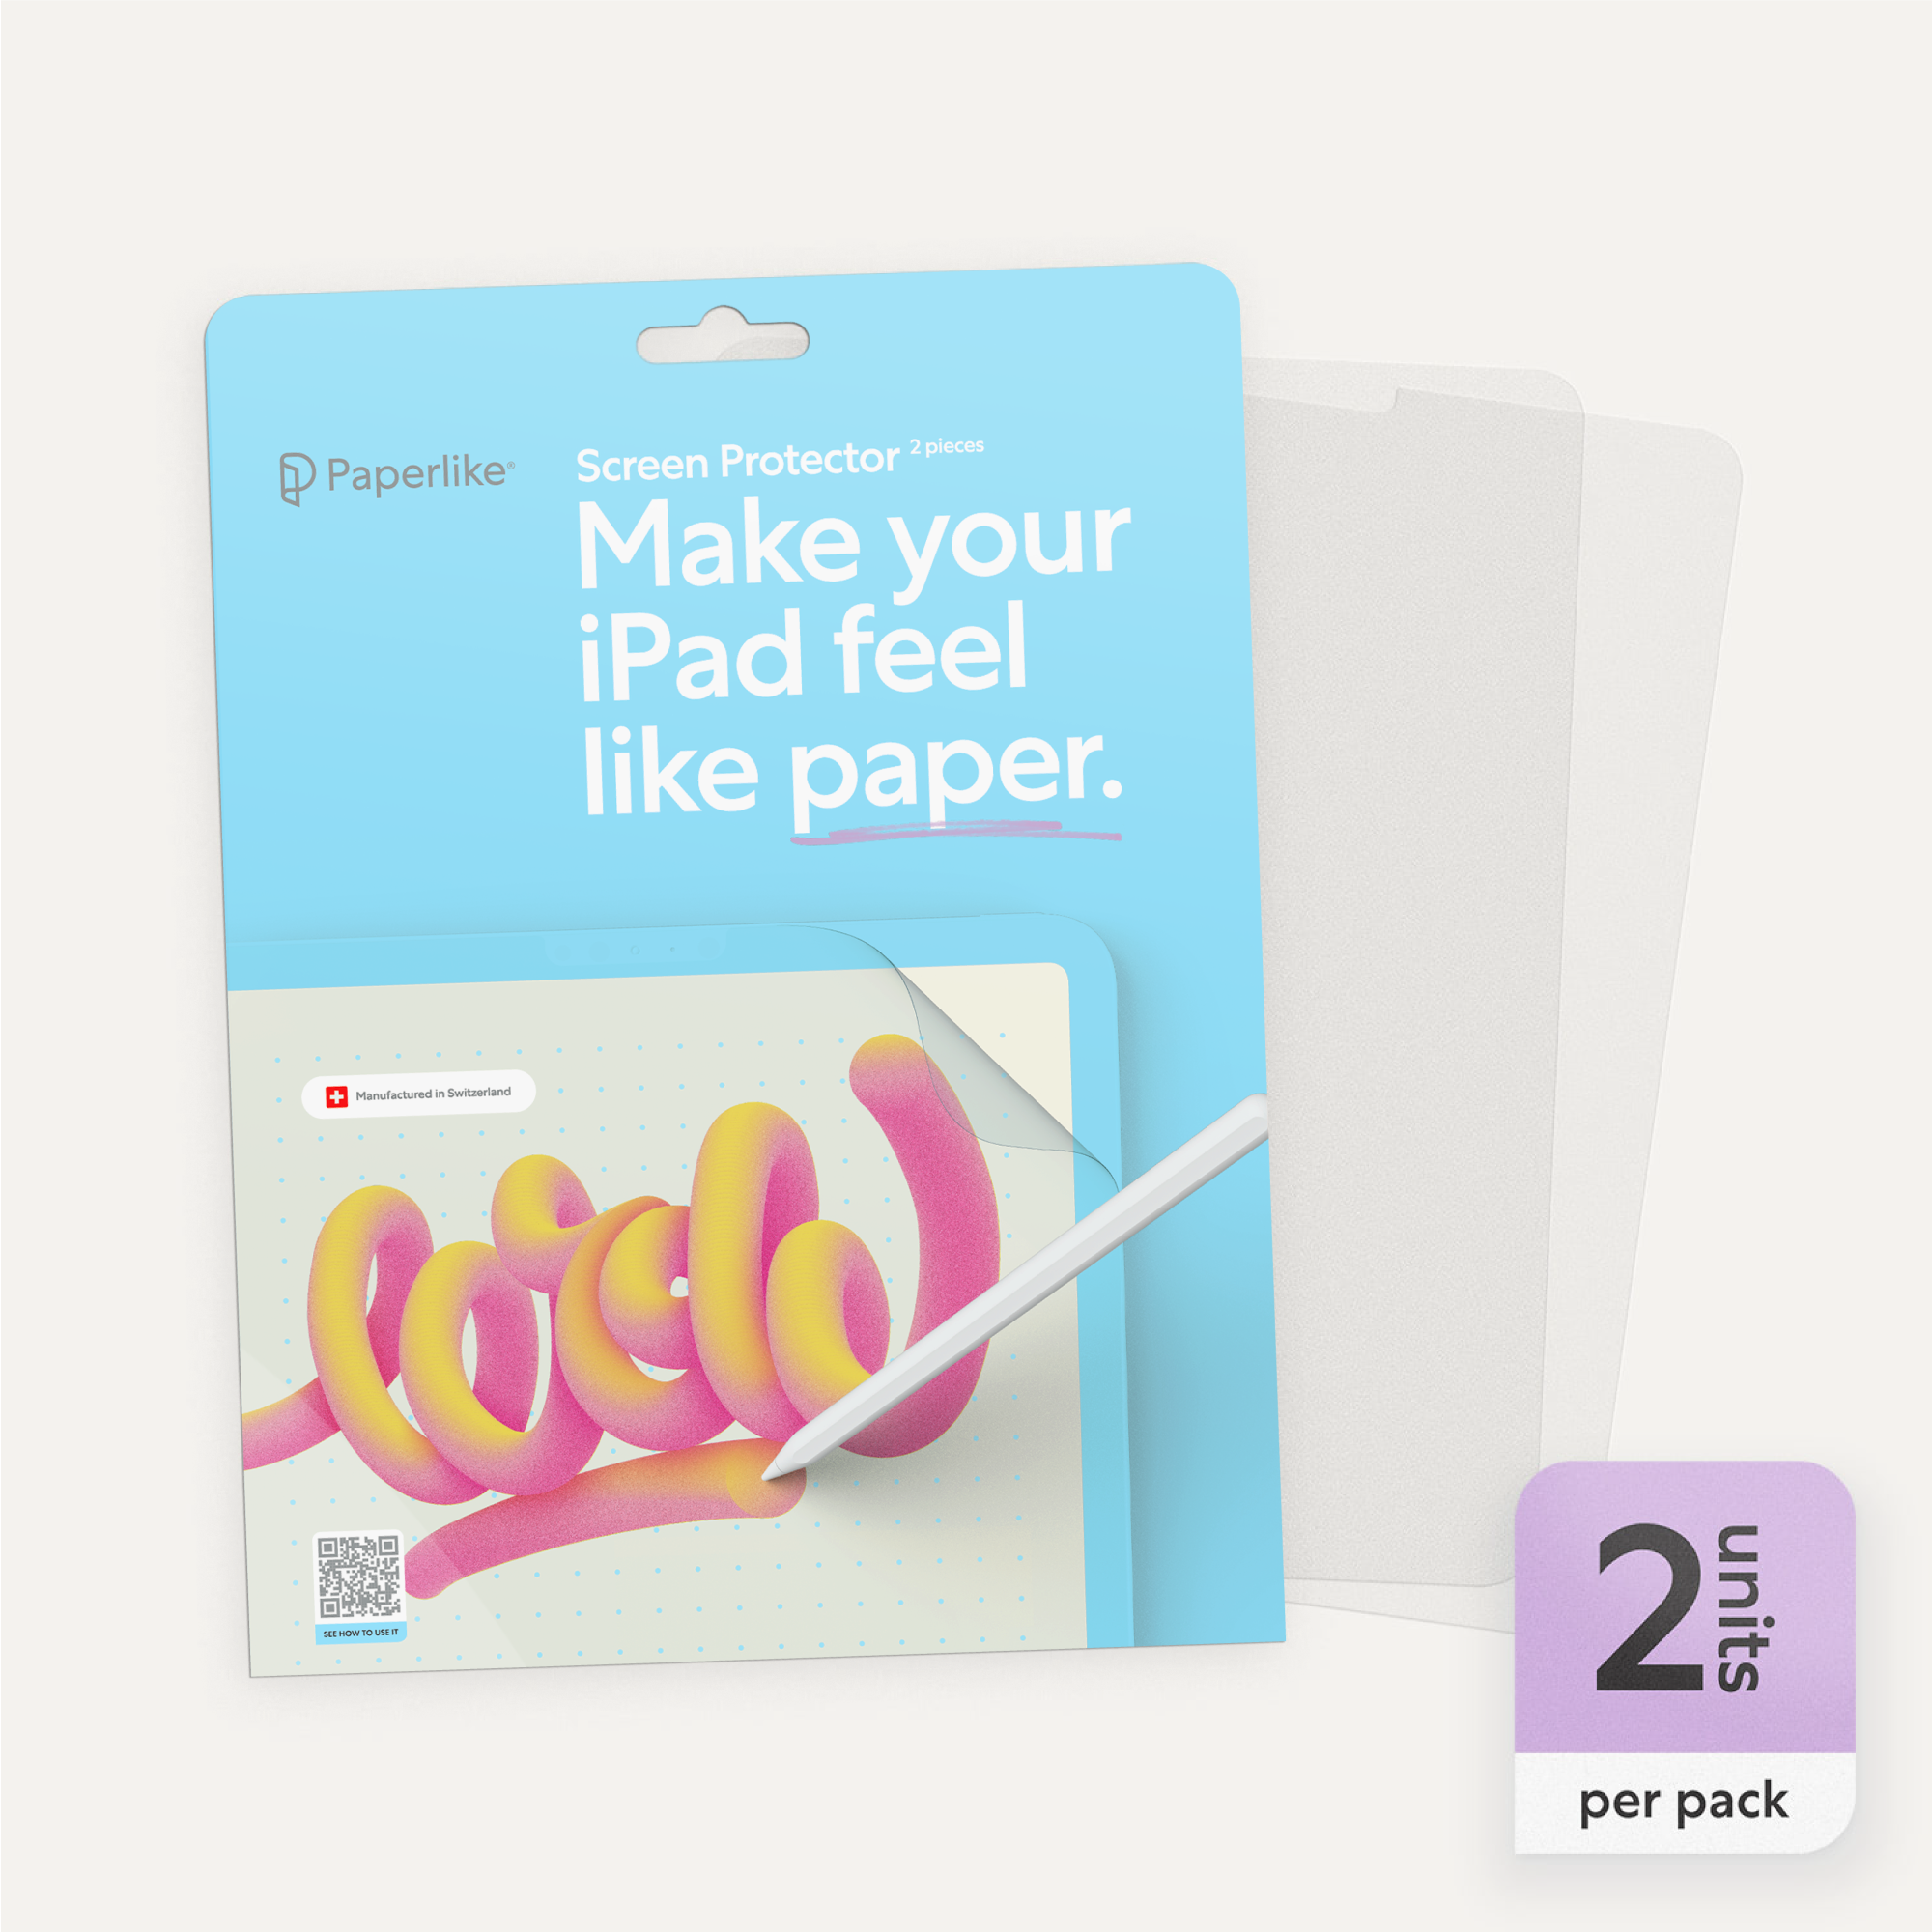 Paperlike paper-feel screen protector, 2-units per pack for increased precision and accuracy when using your Apple Pencil.